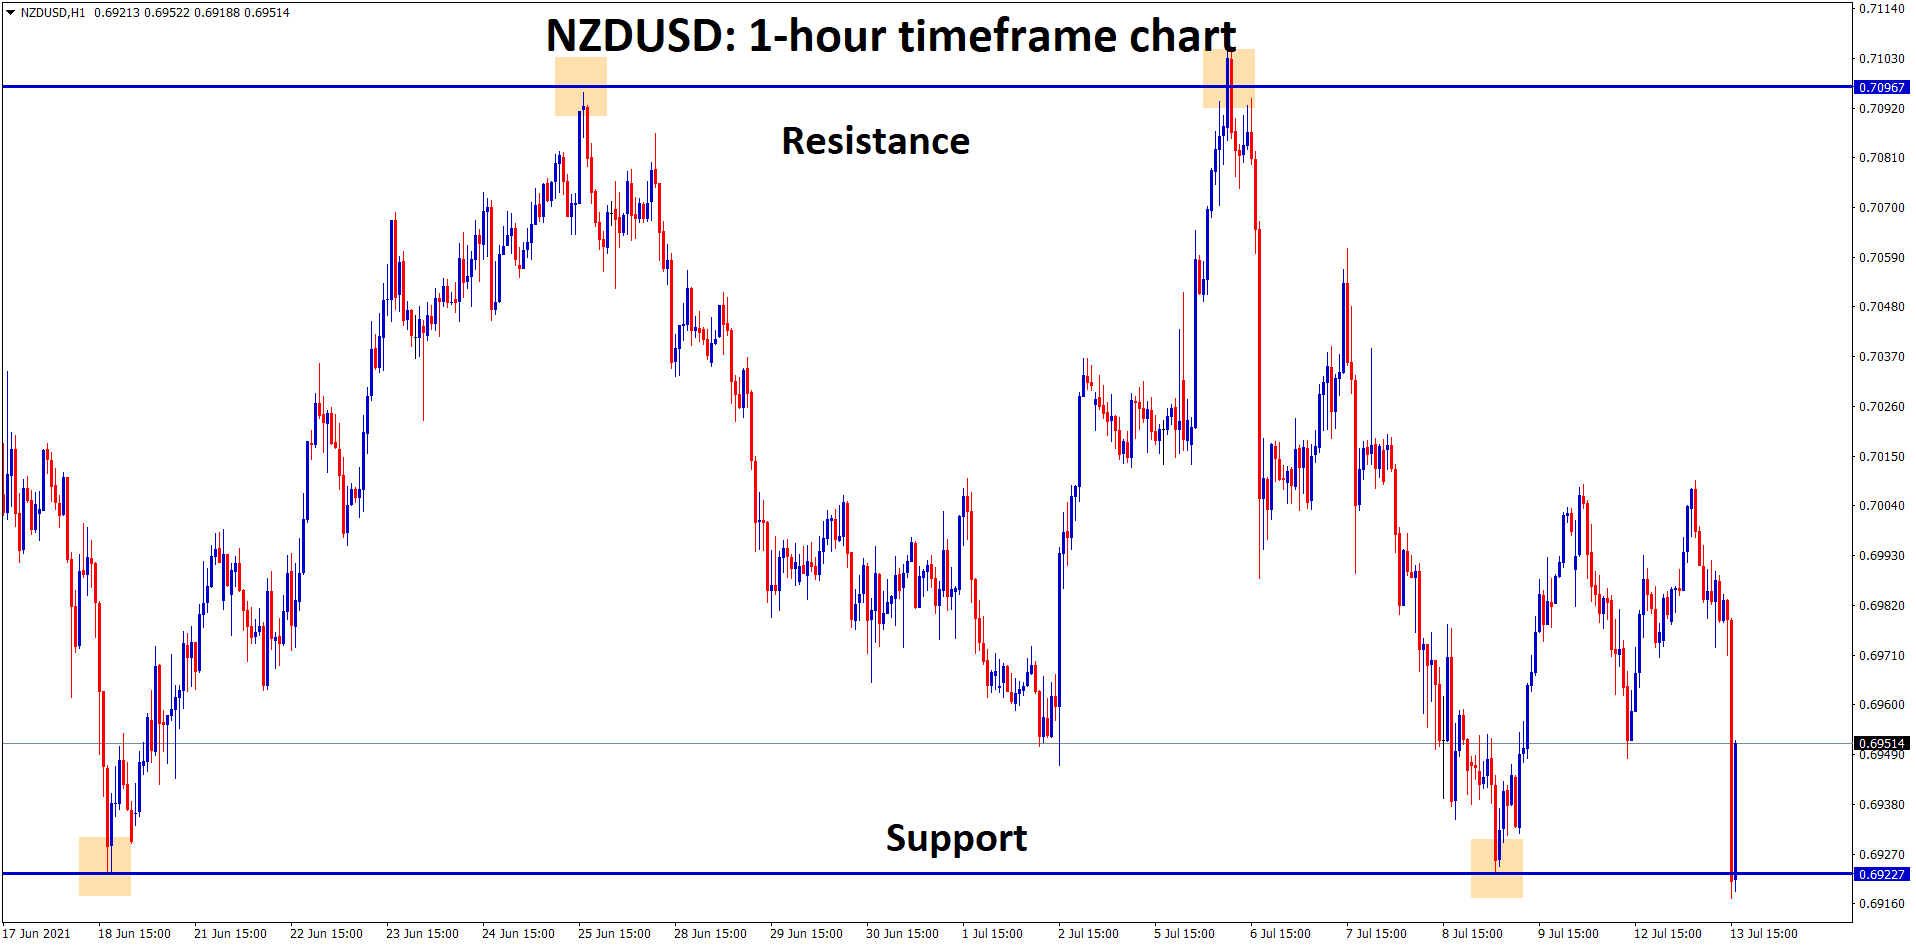 NZDUSD made a sharp bounce back after hitting the major support zone